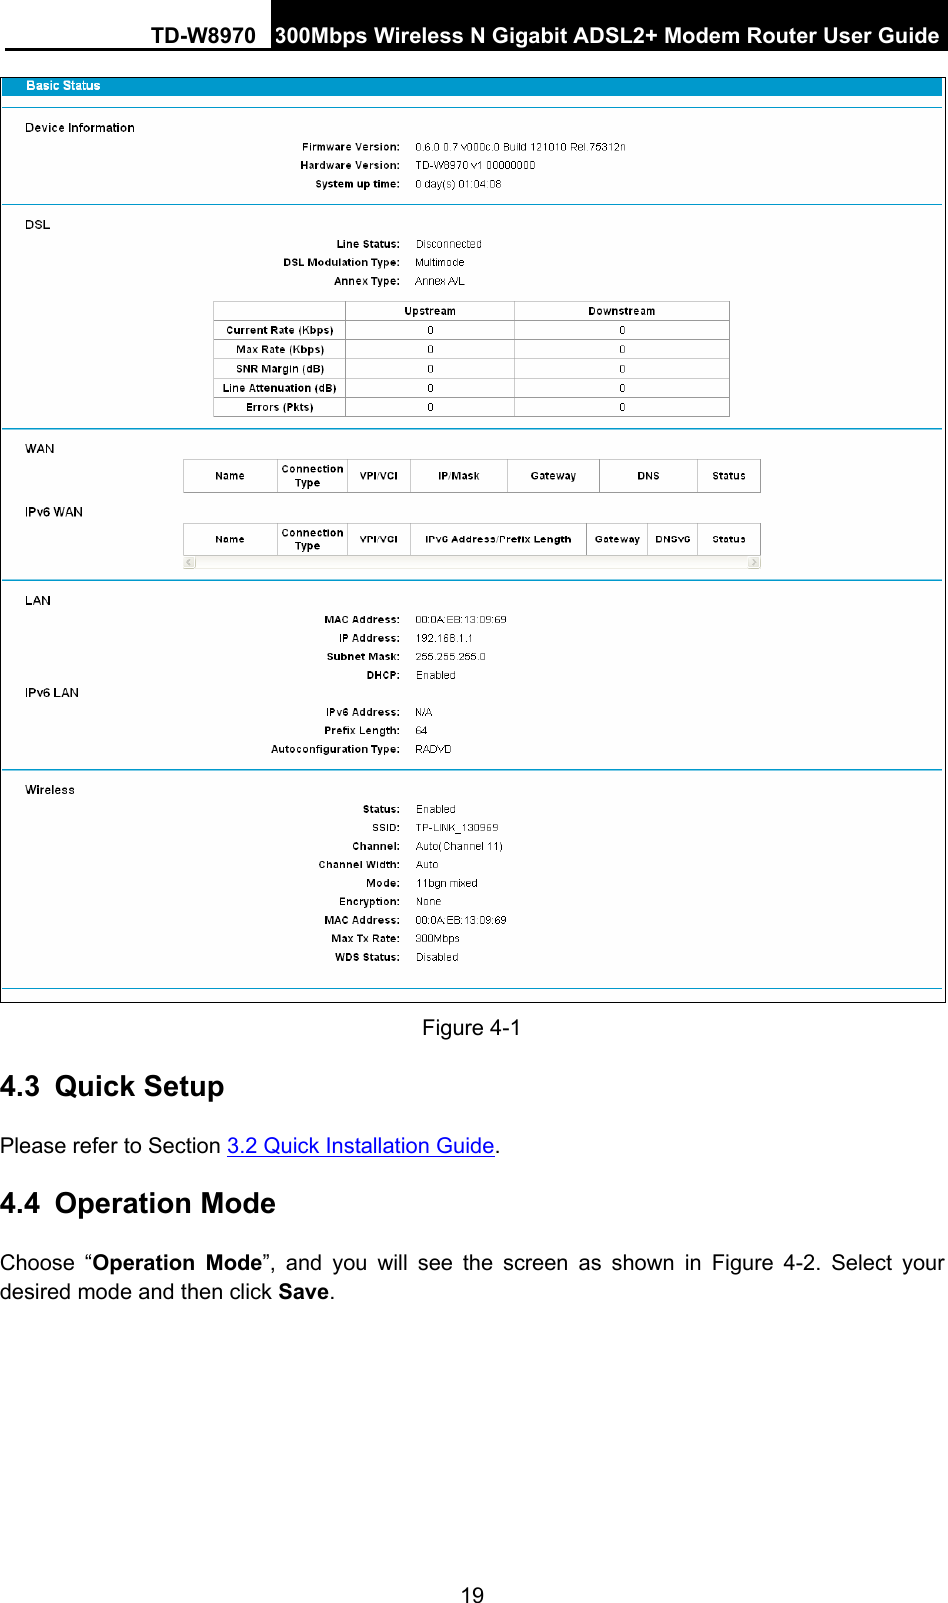 TD-W8970 300Mbps Wireless N Gigabit ADSL2+ Modem Router User Guide 19  Figure 4-1 4.3  Quick Setup Please refer to Section 3.2 Quick Installation Guide. 4.4  Operation Mode Choose “Operation Mode”, and you will see the screen as shown in Figure 4-2. Select your desired mode and then click Save. 